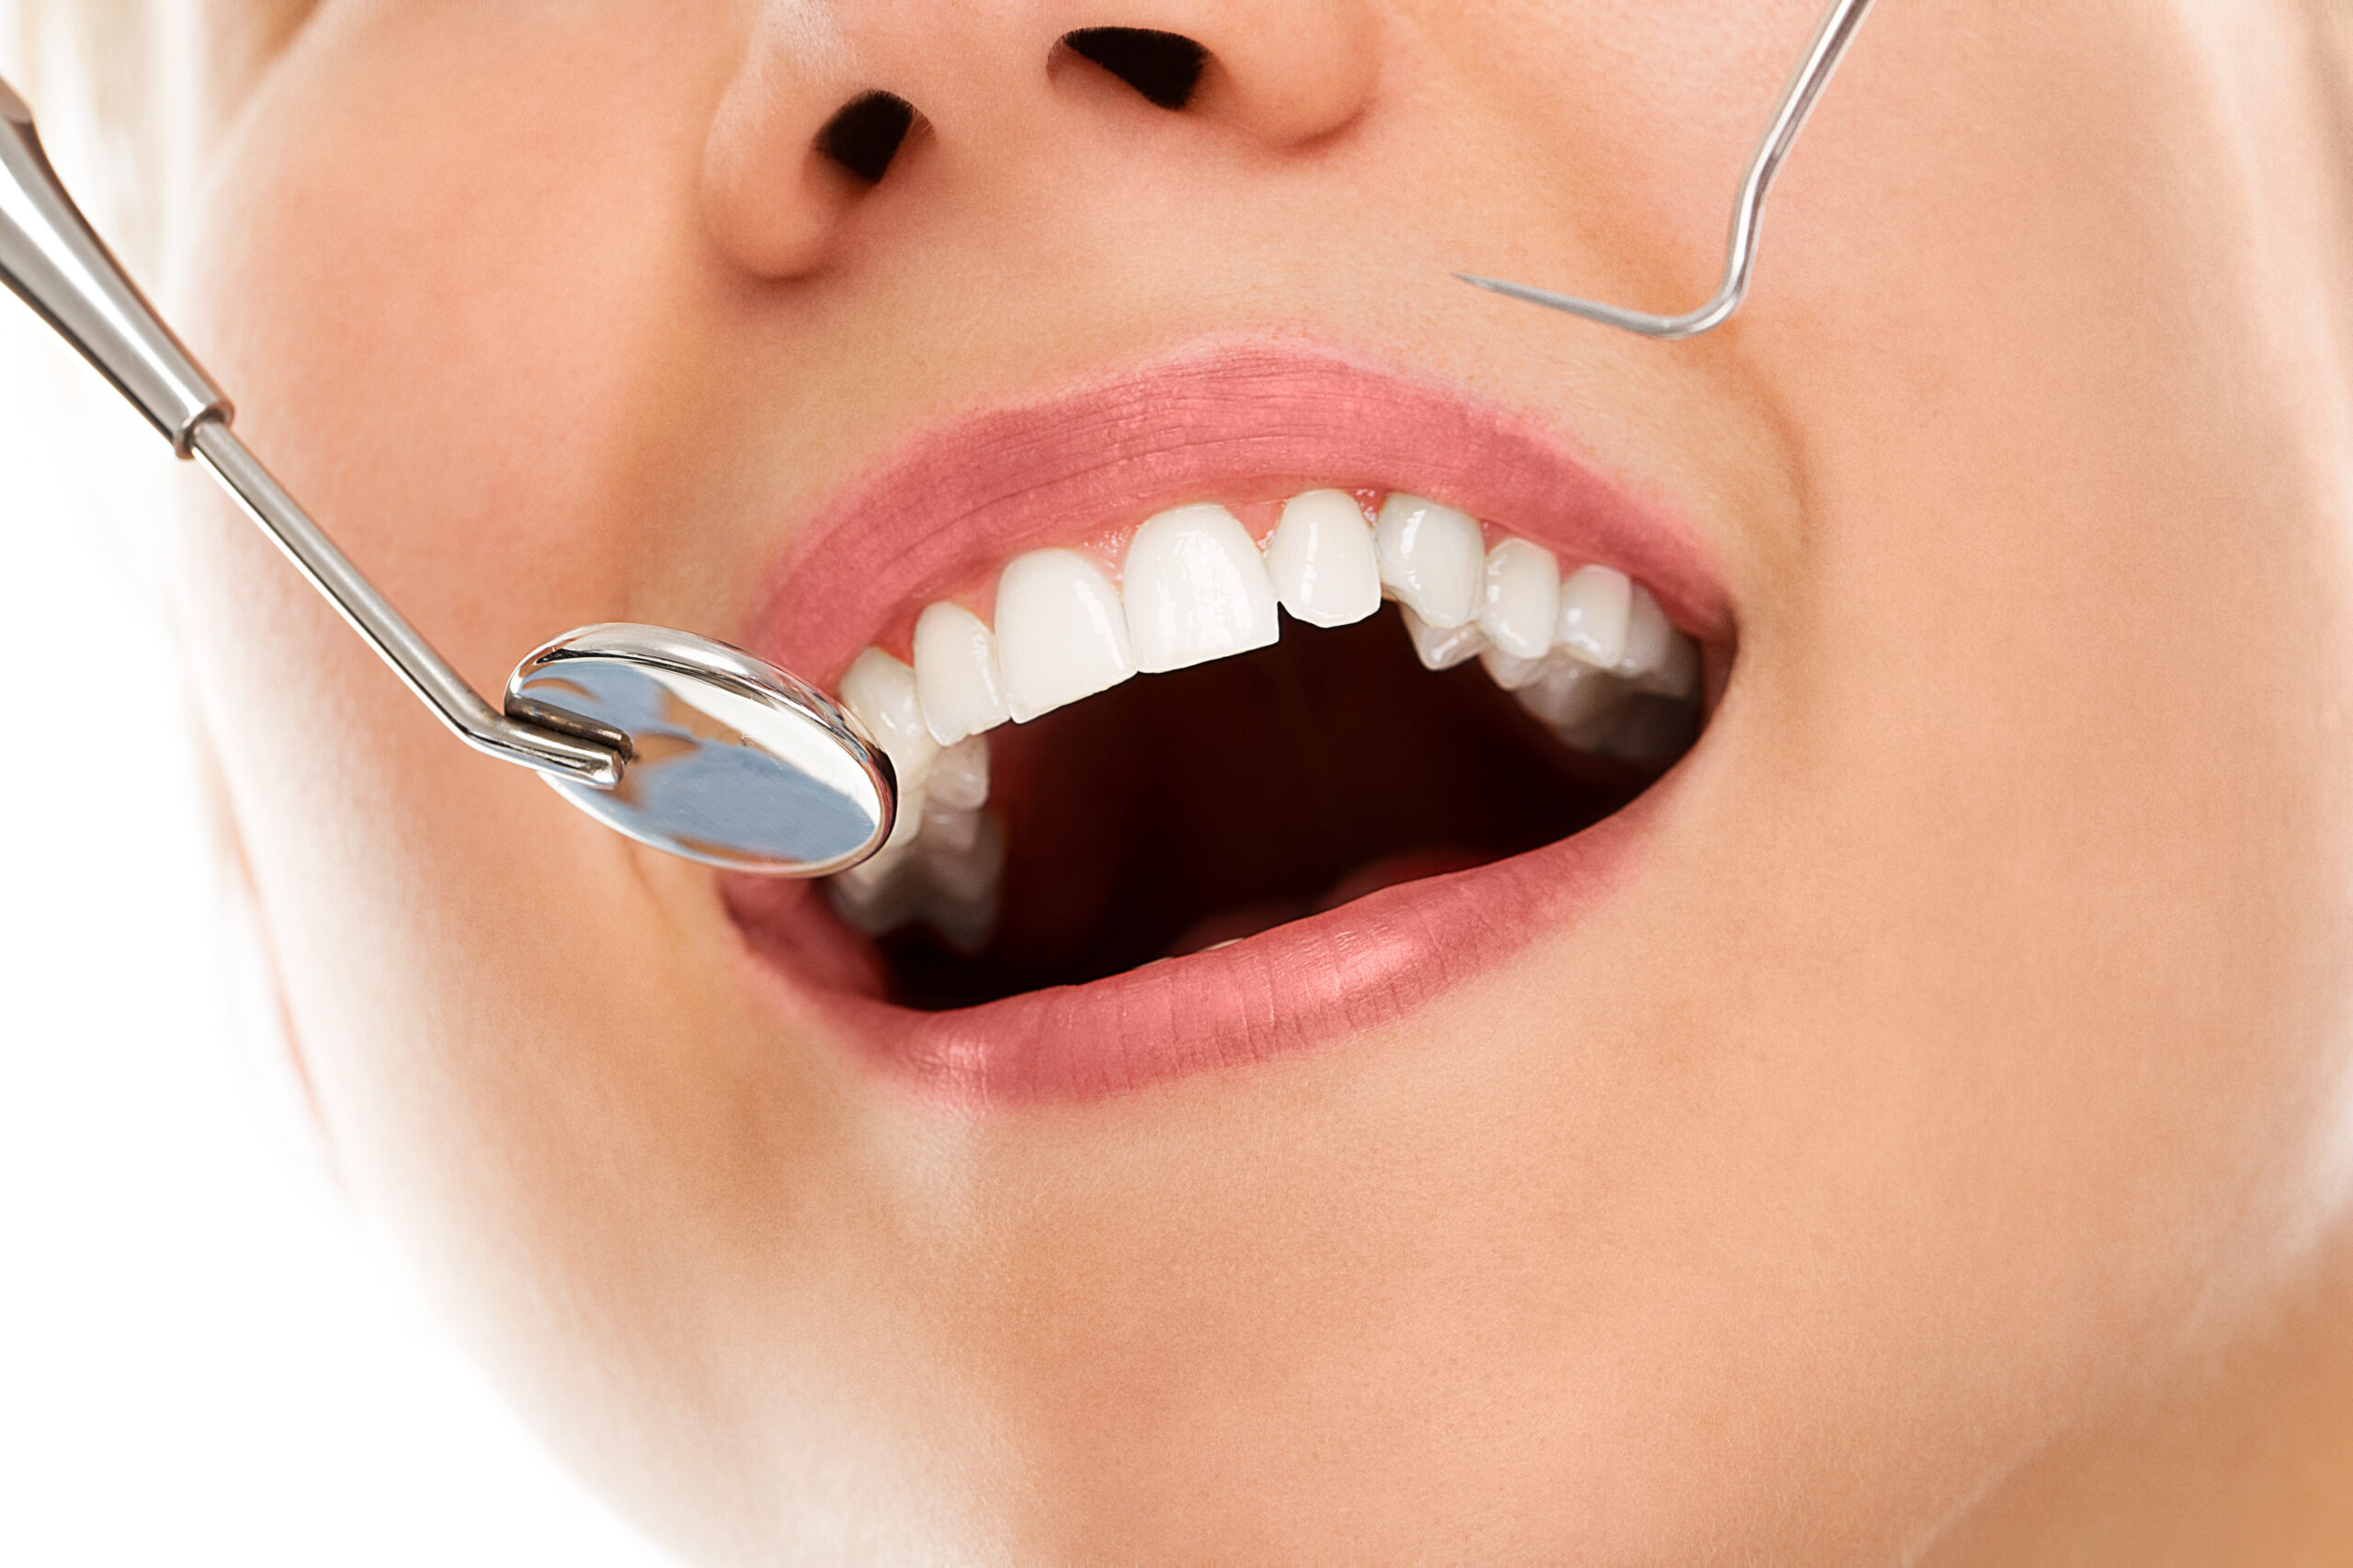 Quick pain relief strategies after teeth cleaning